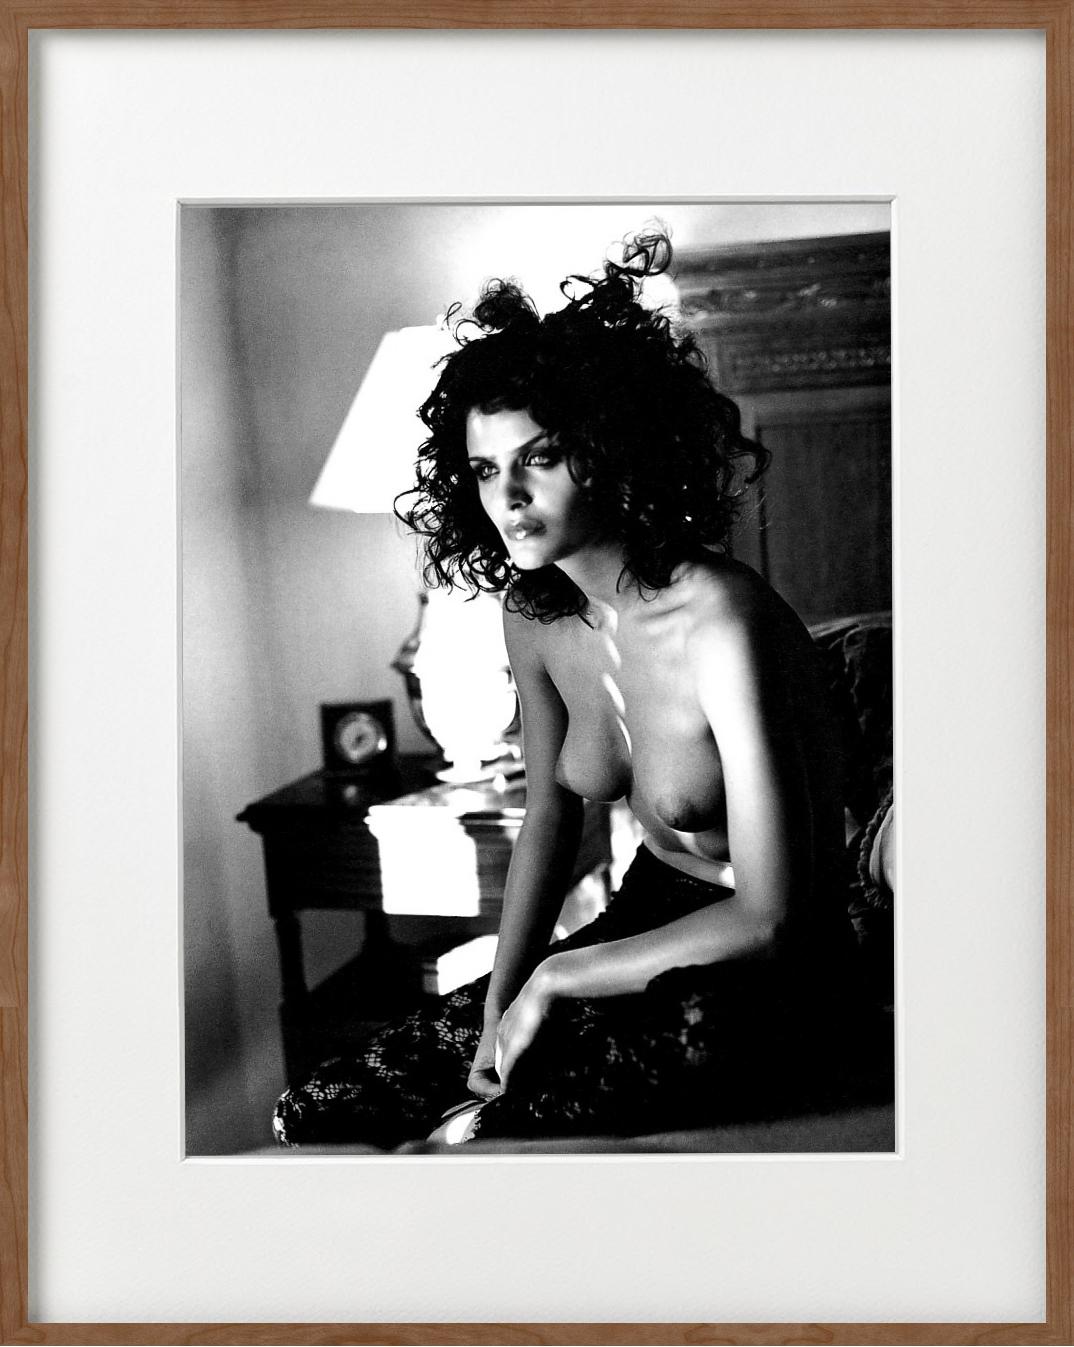 'Helena Christensen' - nude with tights in an hotel, fine art photography, 1995 - Gray Black and White Photograph by Sante D´ Orazio